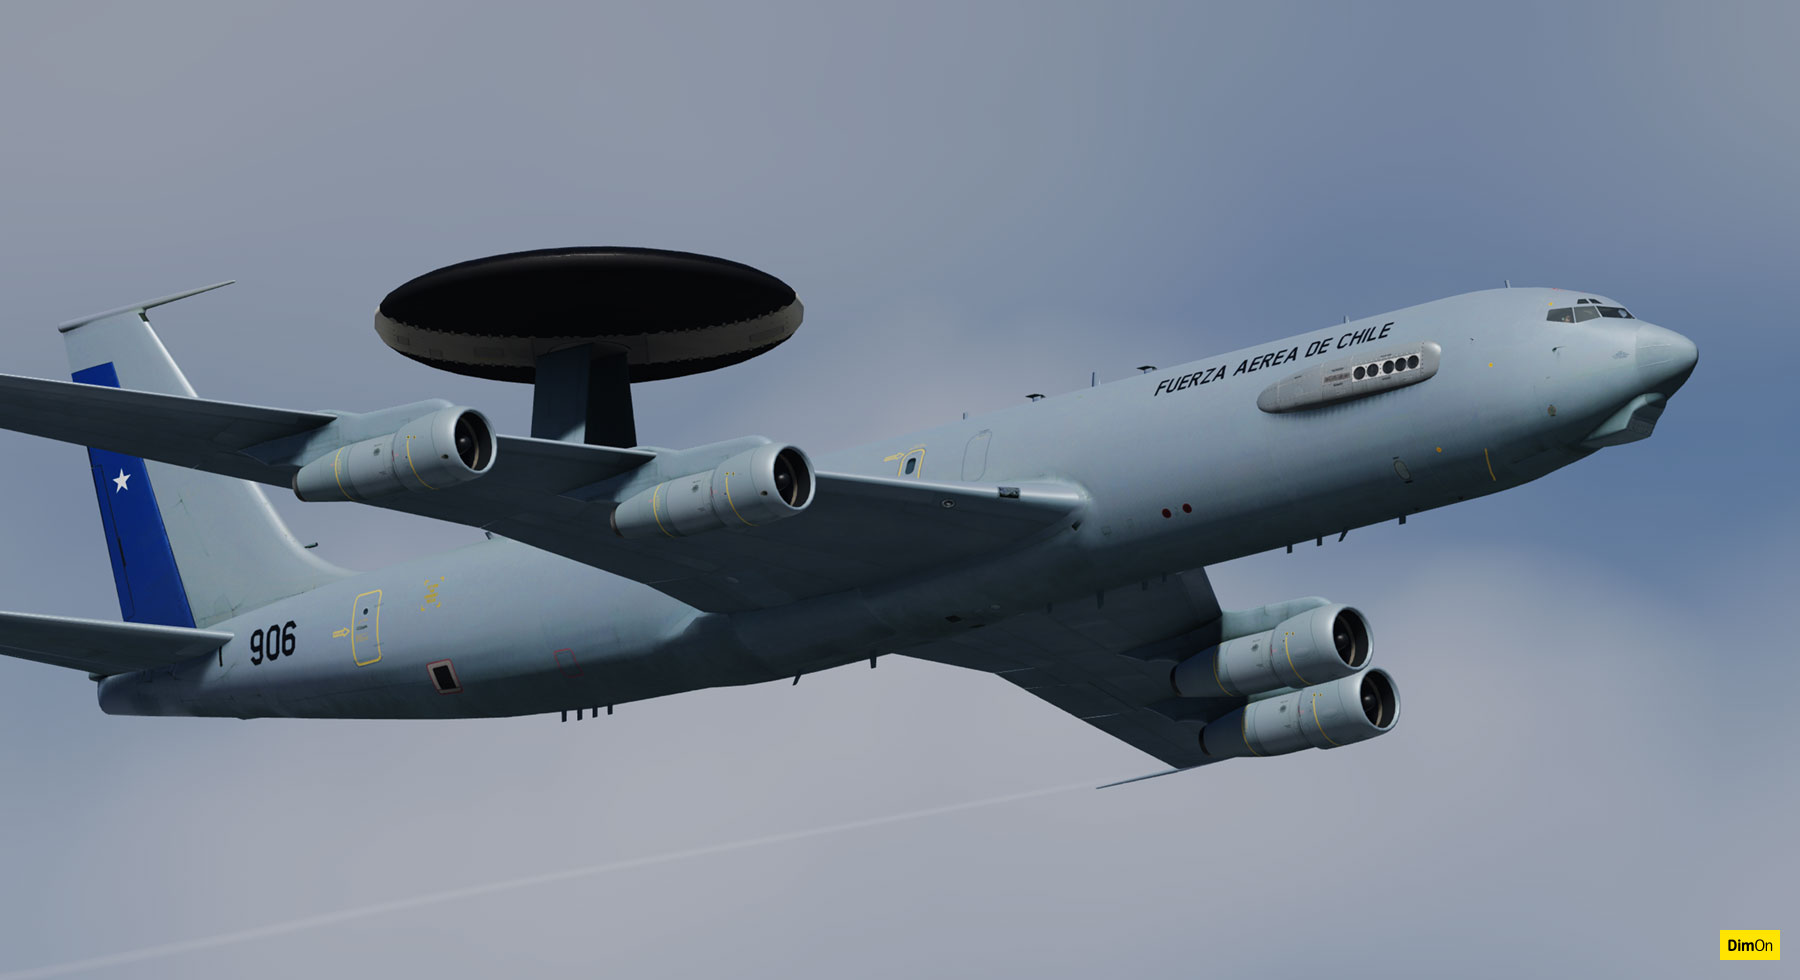 Chilean Air Force E-3D (FACh 905 and FACh 906) - Updated 27 August 2022